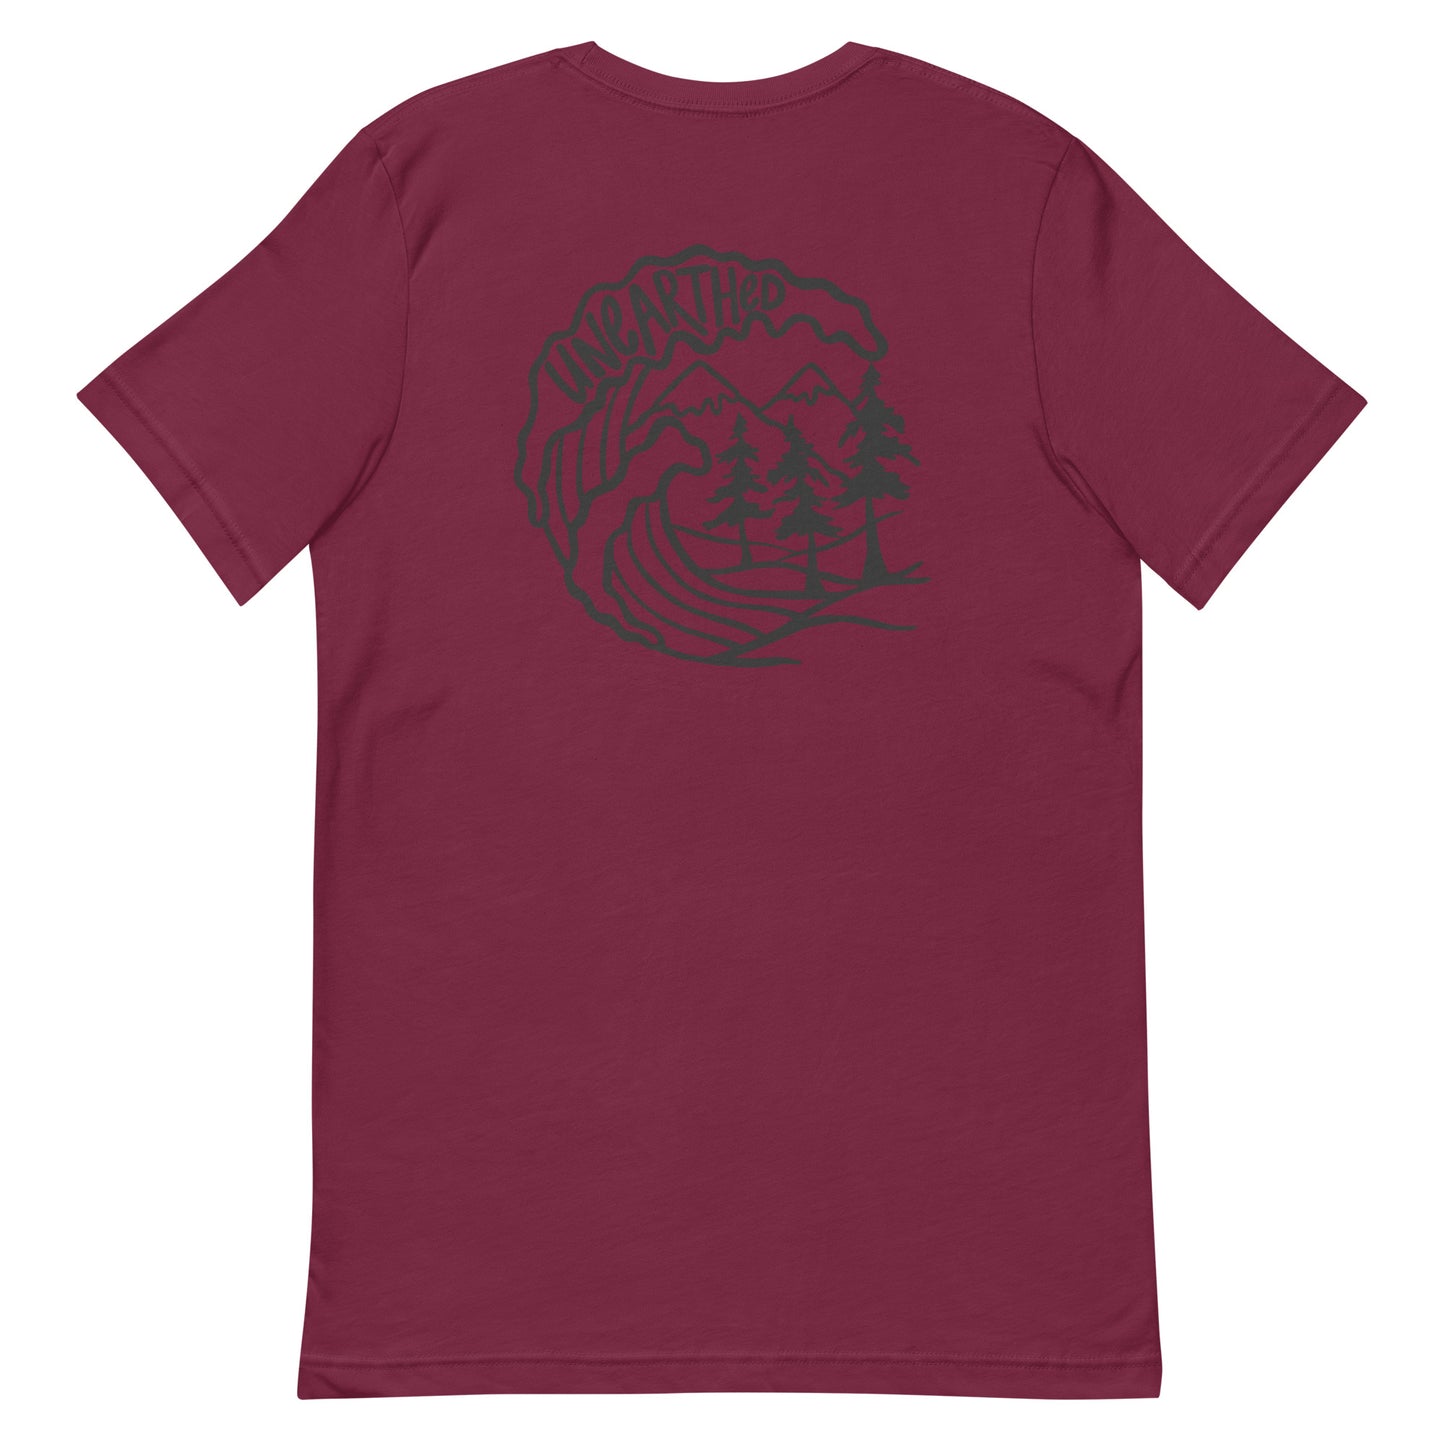 unearthed wave, pines and mountains t-shirt